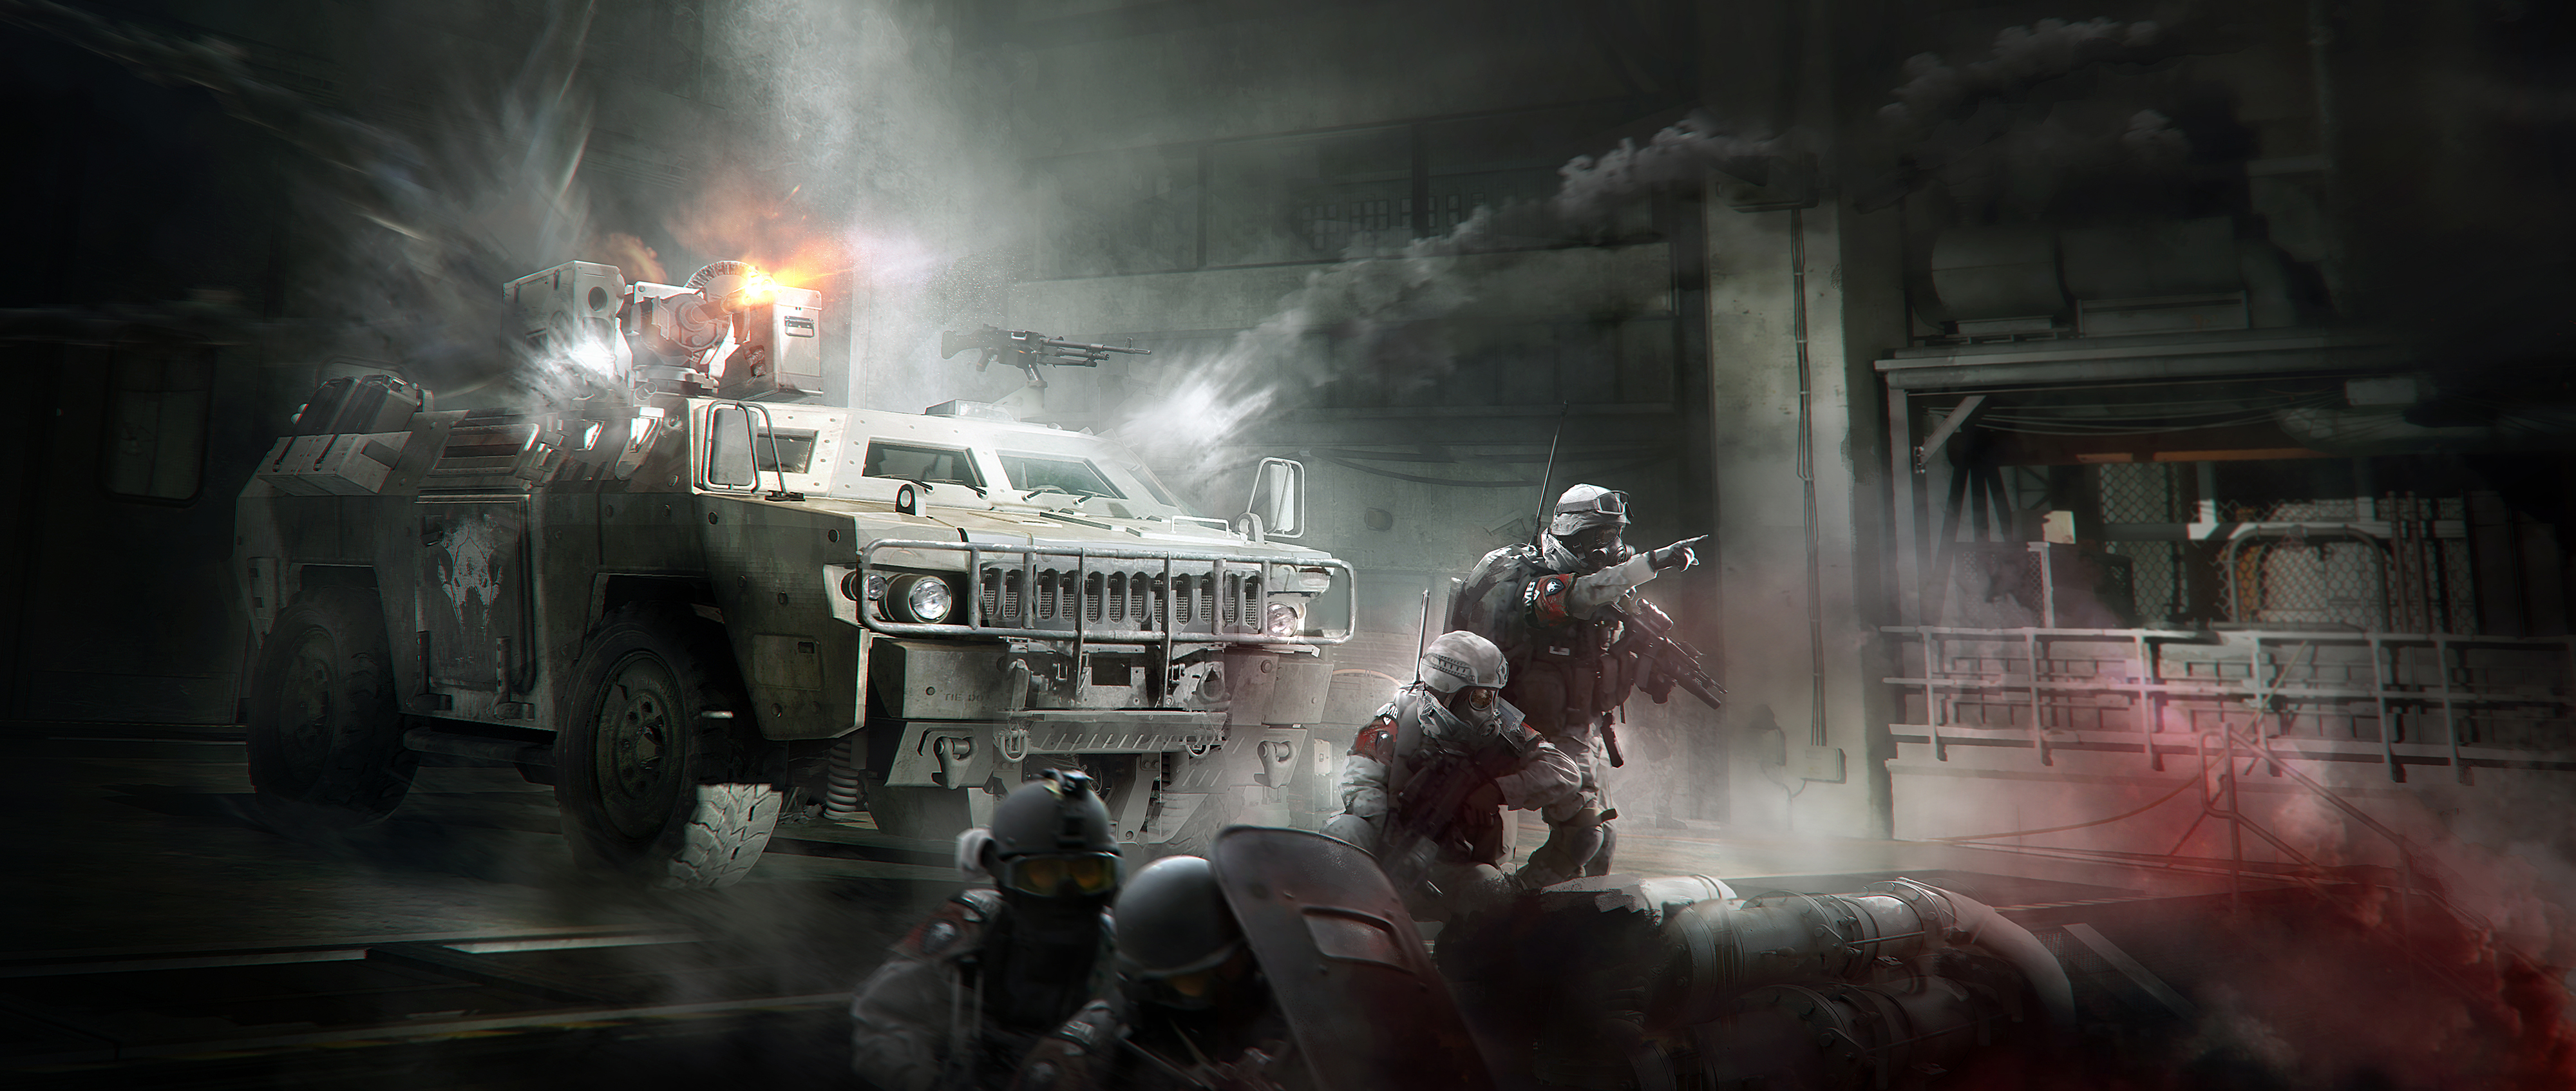 Soldier Armored Vehicle Tom Clancys The Division Battle Vehicle 4000x1694